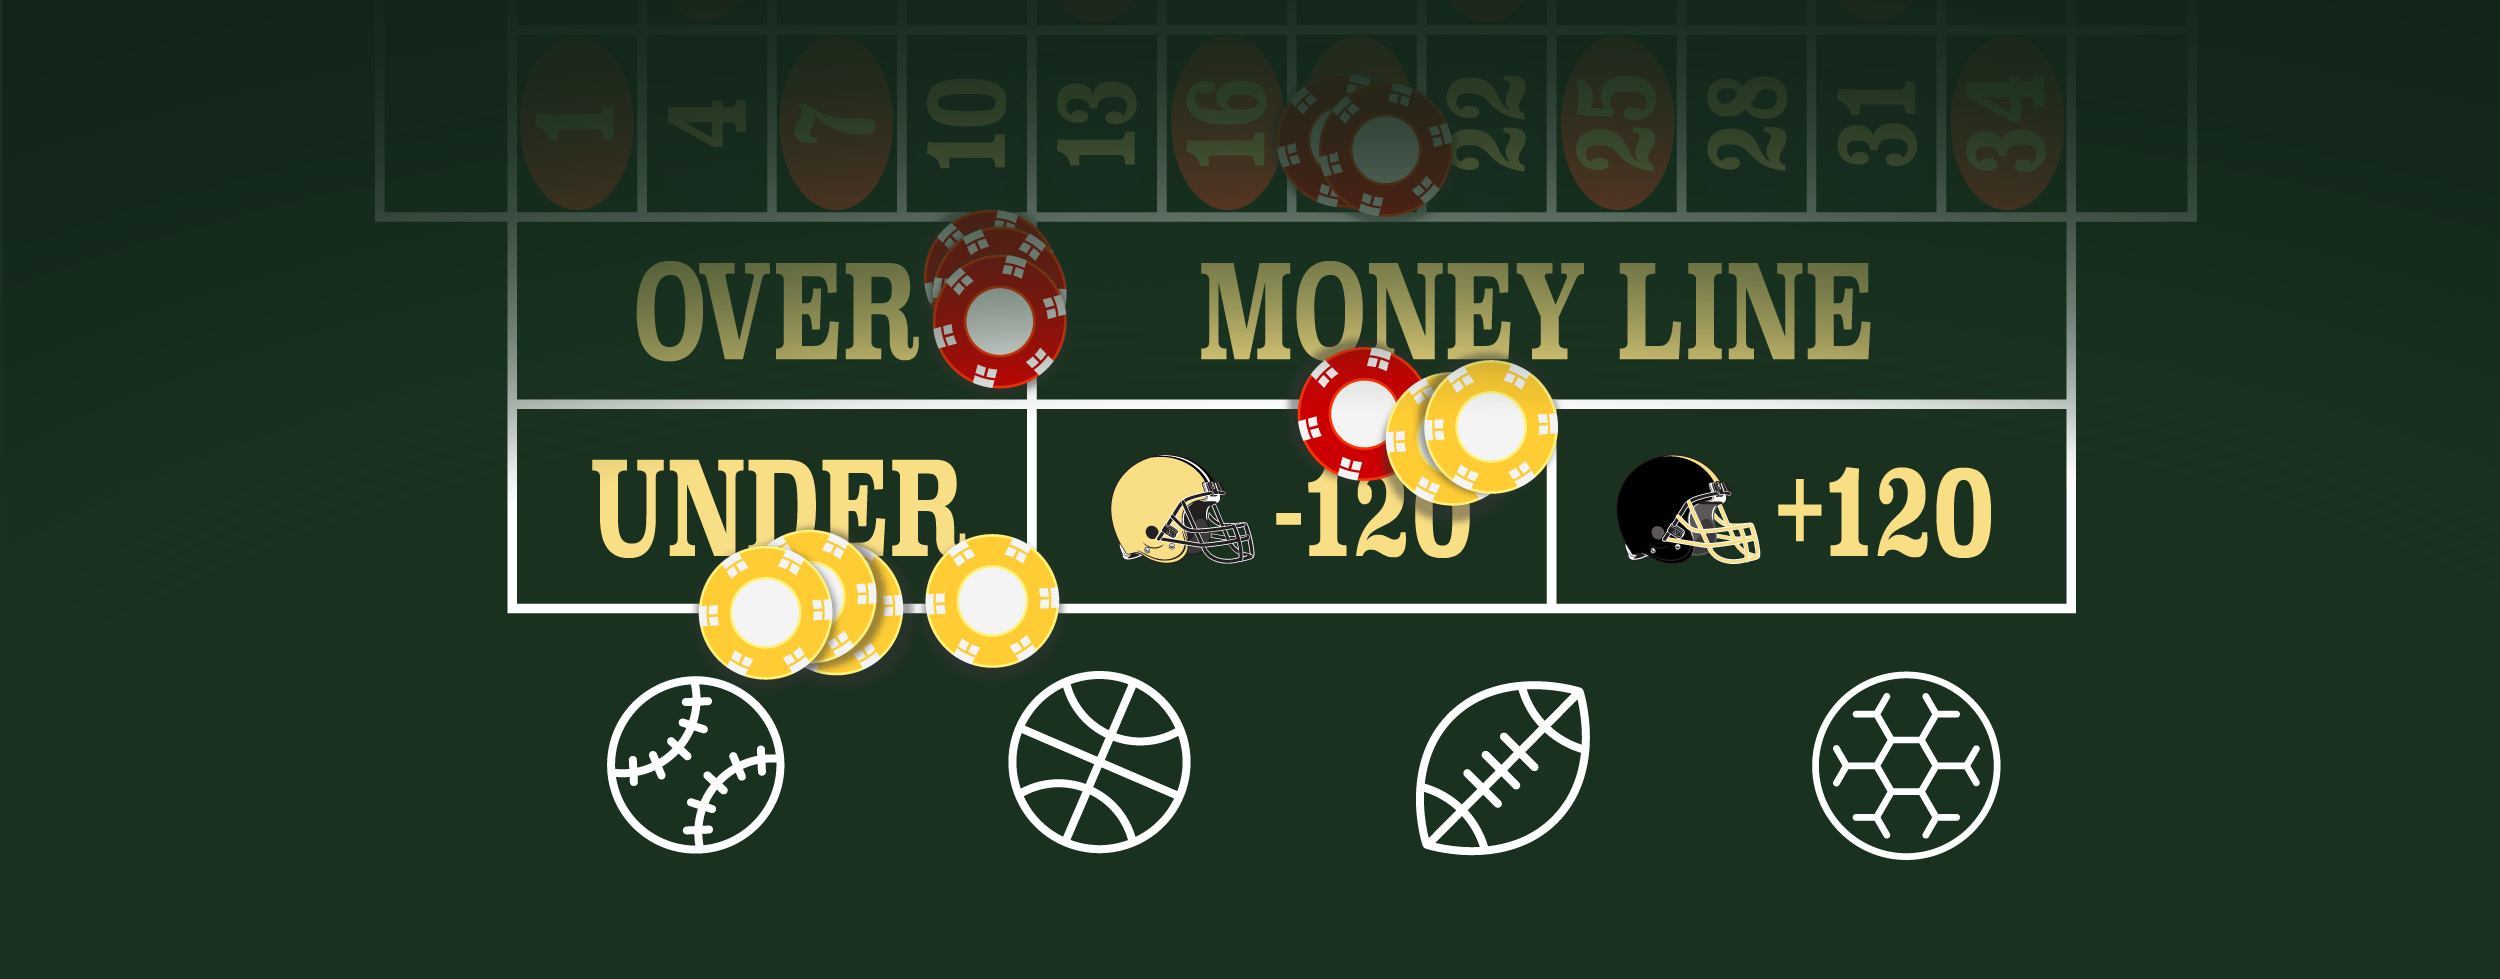 Plus or minus? The over or under? What's a moneyline bet? Breaking down sports betting terms. thumbnail